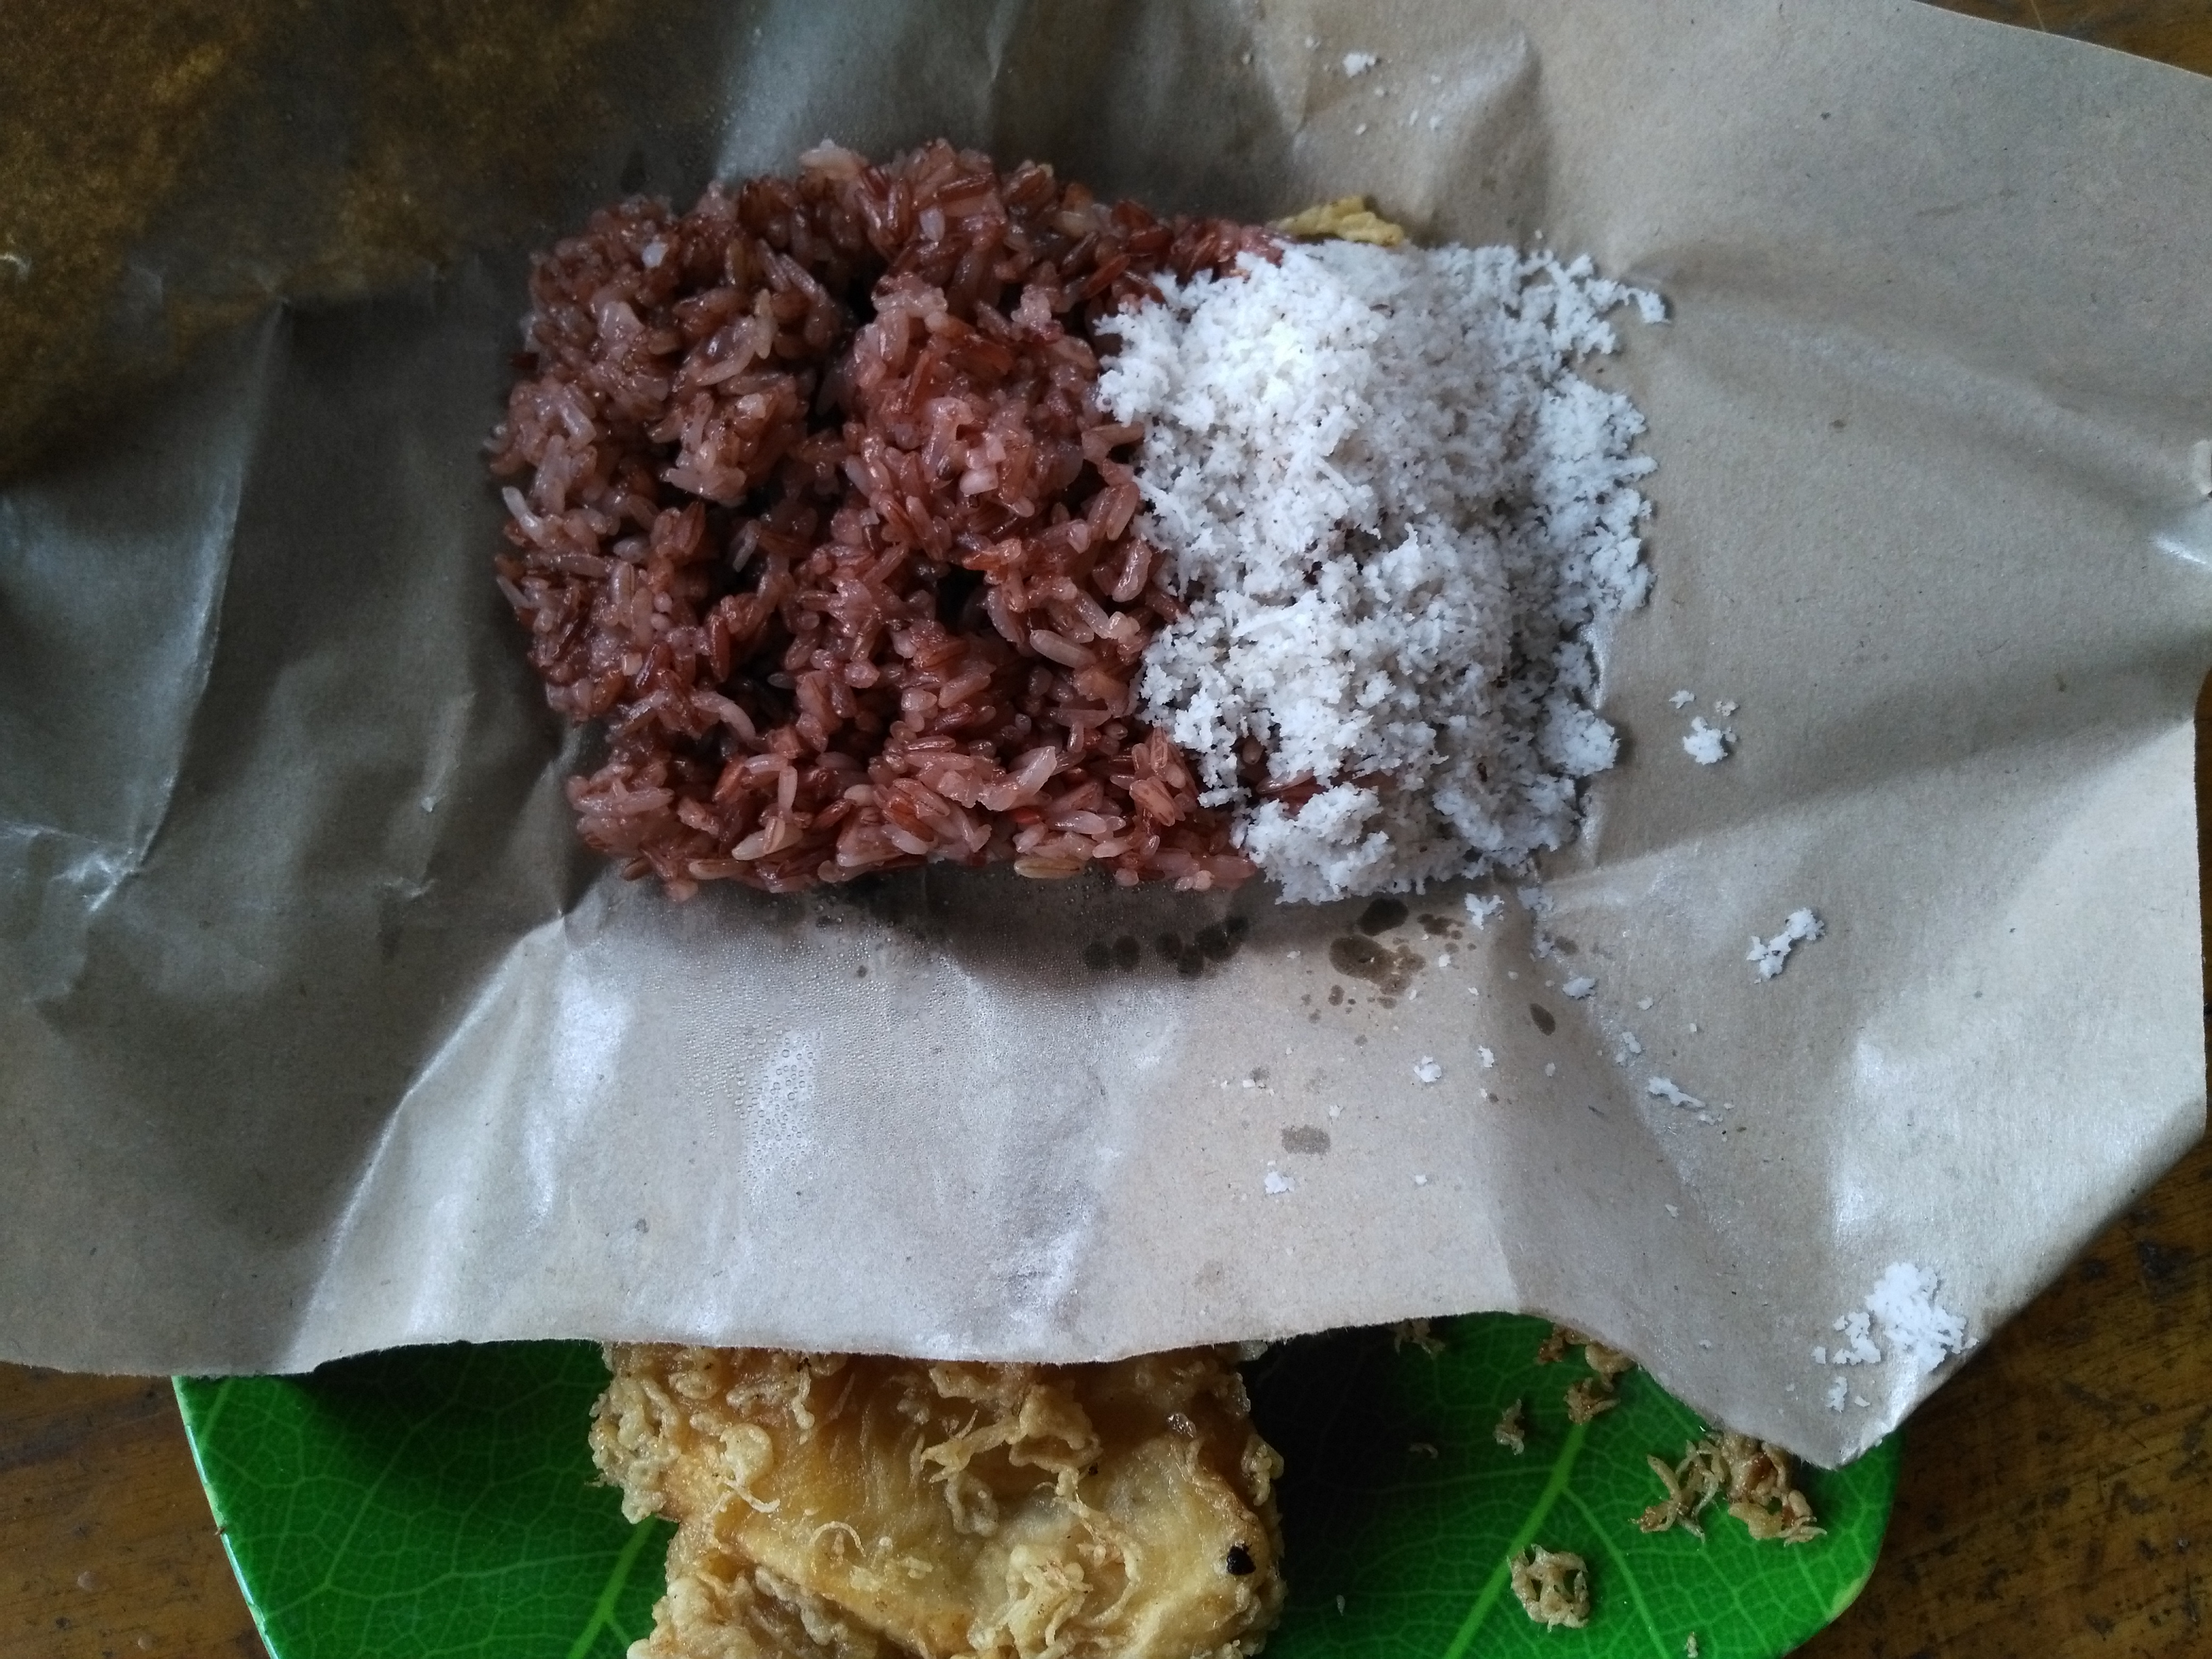 Katan Goreng: Rice, with coconut shavings, and fried banana. An impregnable breakfast food.